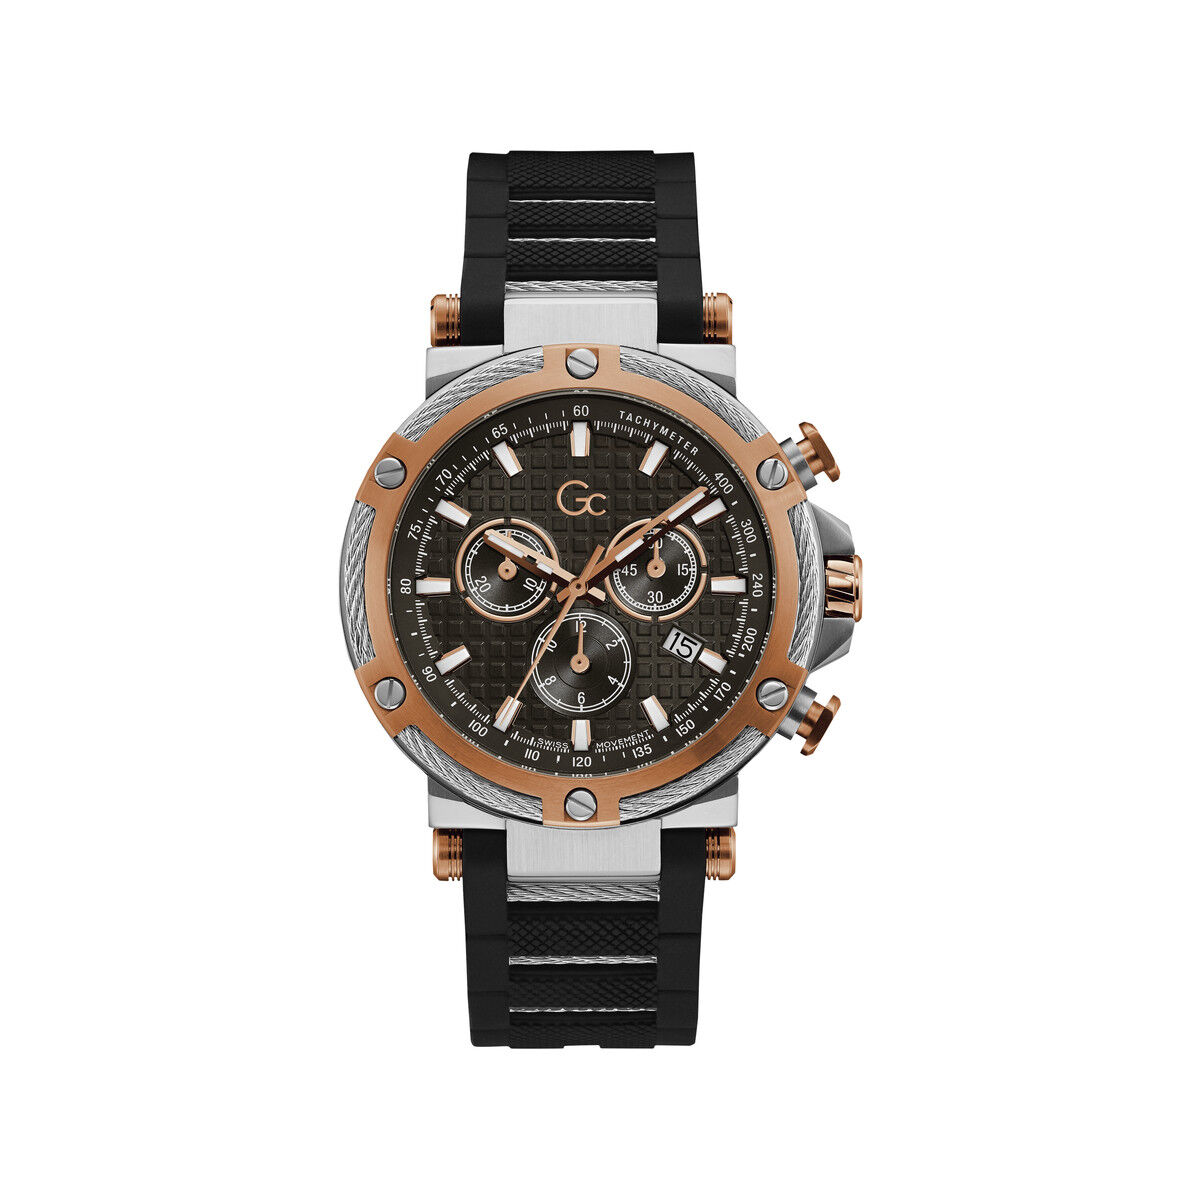 GUESS COLLECTION Montre GC homme chronographe- MATY